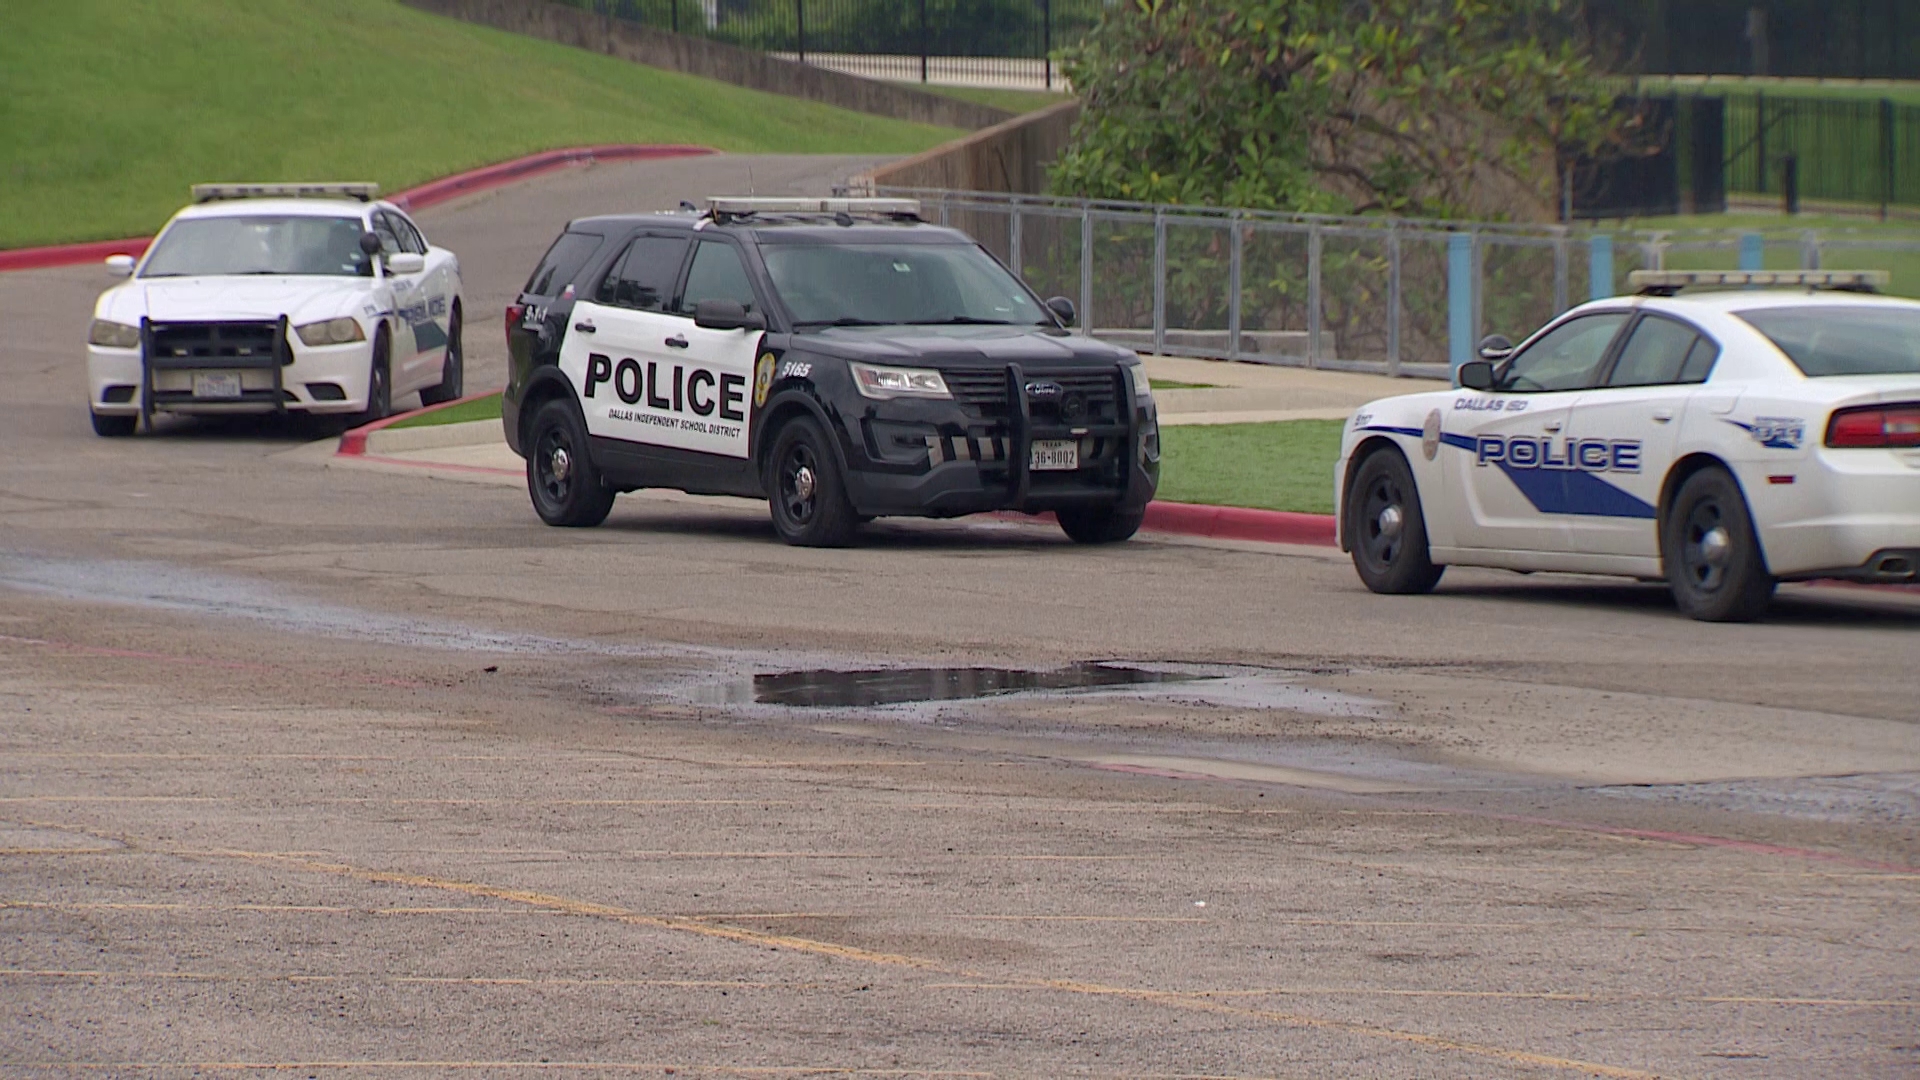 Dallas Police said a school staffer was giving two football players rides home after practice Thursday when someone pulled alongside them and started shooting.